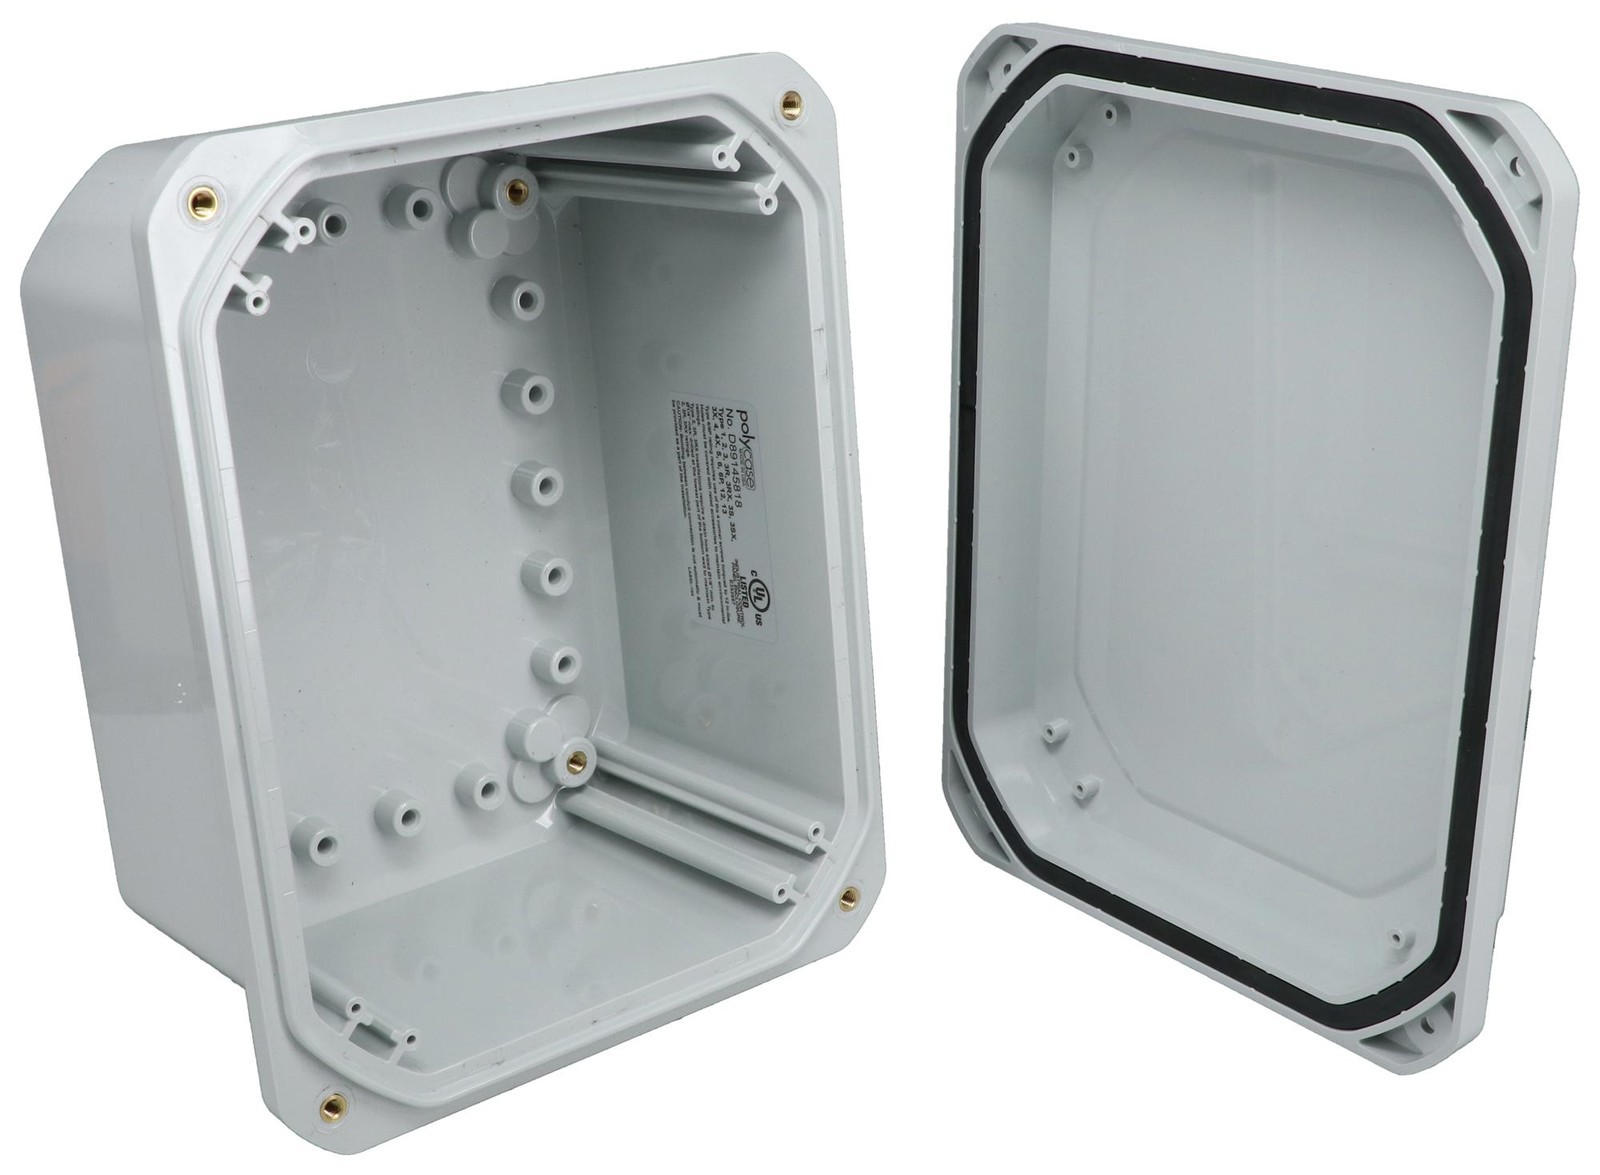 Bud Industries Dps-28708 Enclosure, Outdoor, Pc, Light Grey